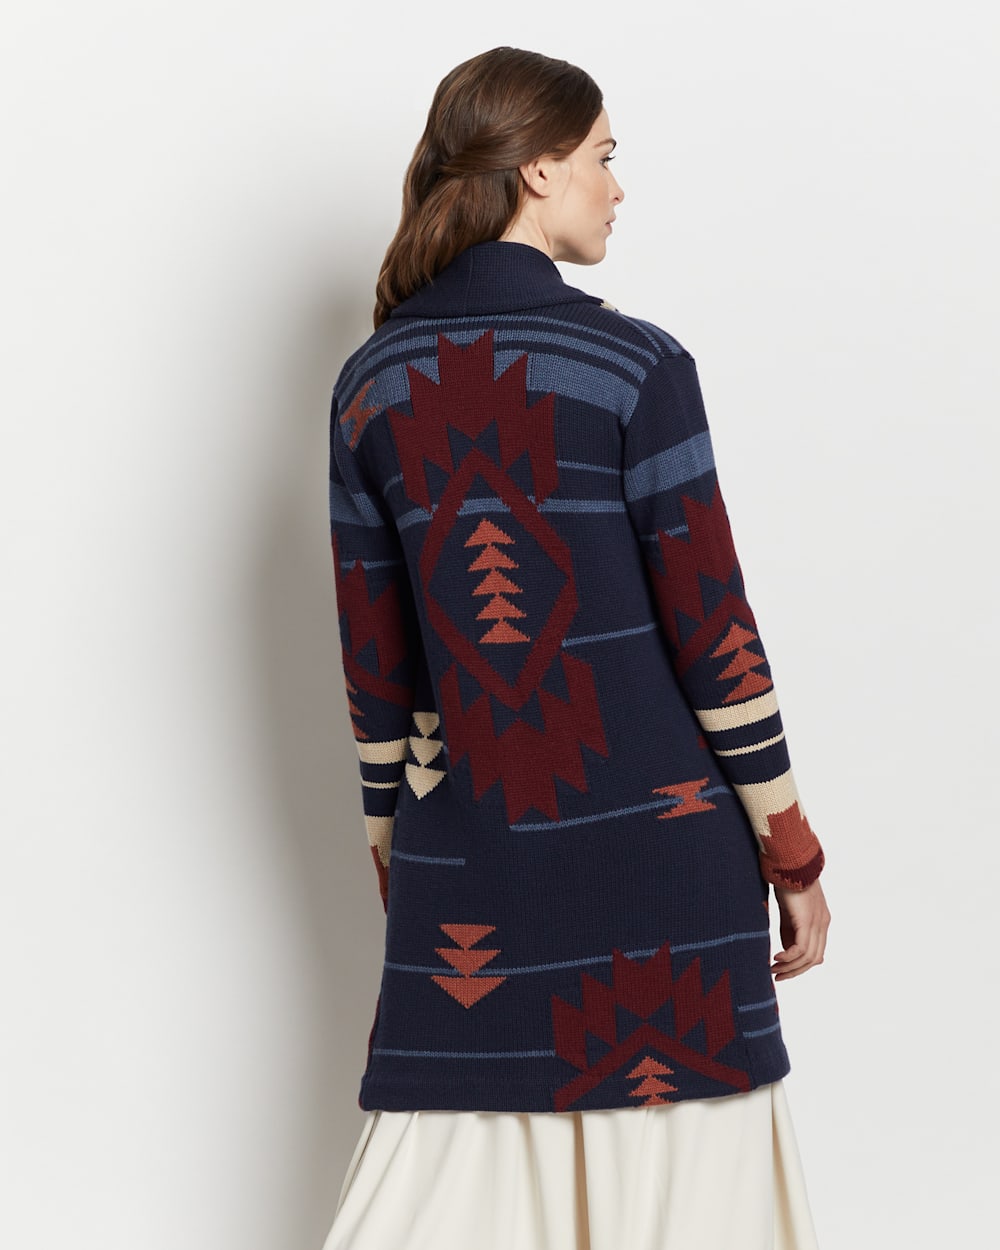 ALTERNATE VIEW OF WOMEN'S GRAPHIC SWEATER COAT IN NAVY/MAROON MULTI image number 2